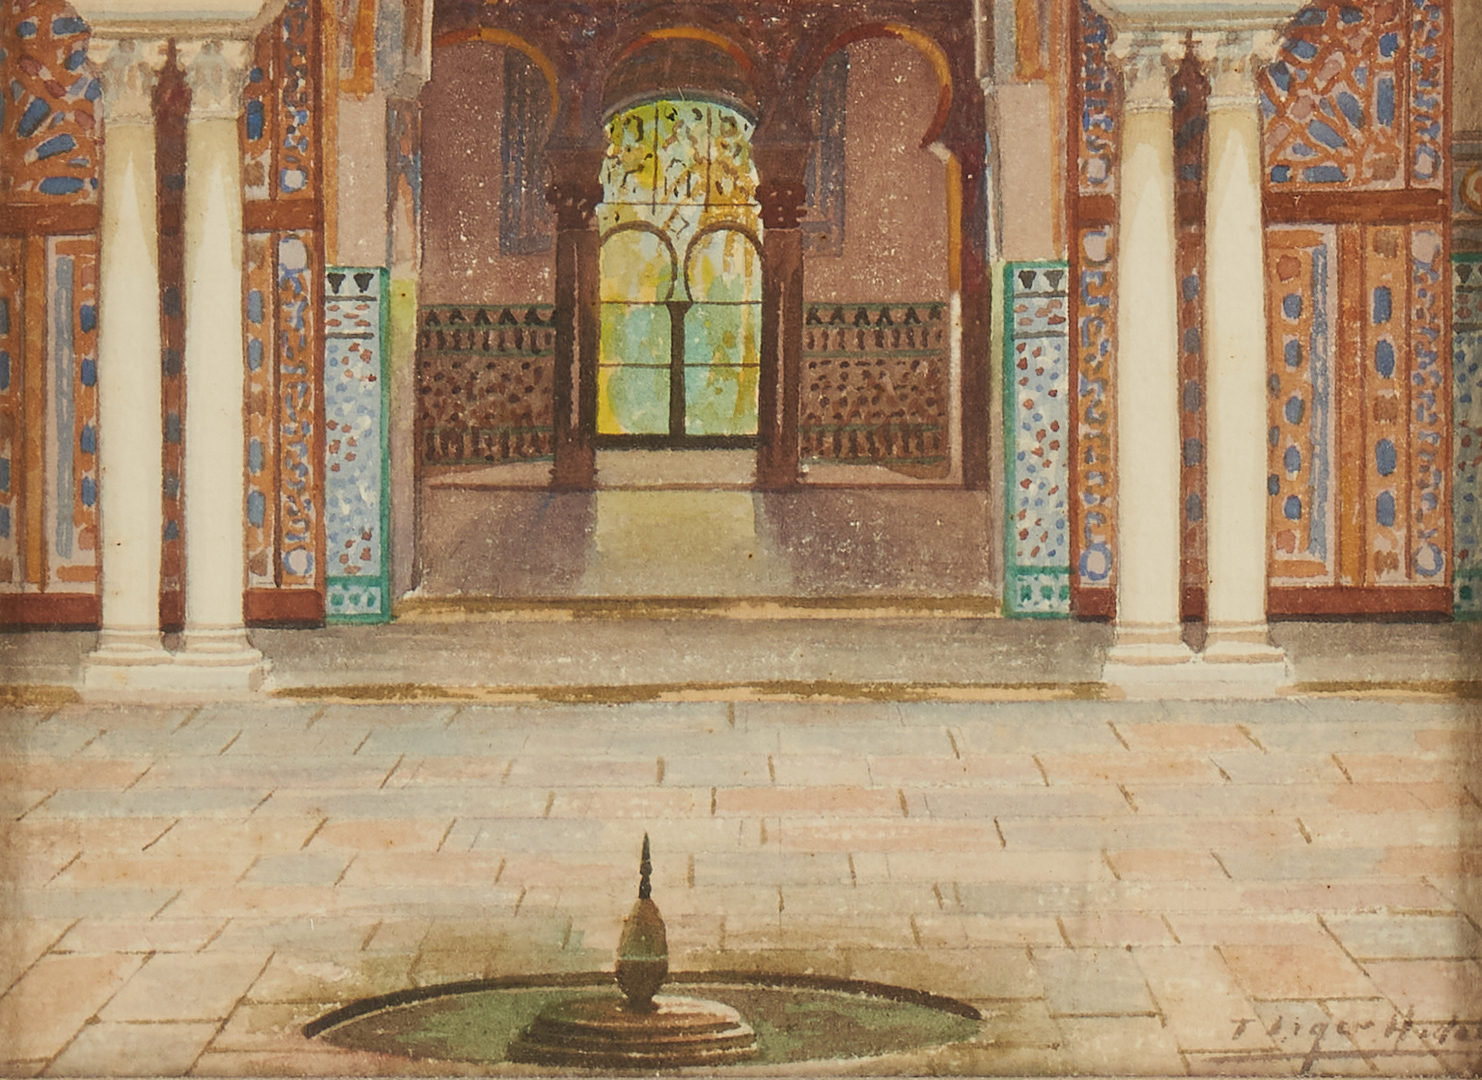 Lot 774: Watercolor of Islamic Palace or Temple